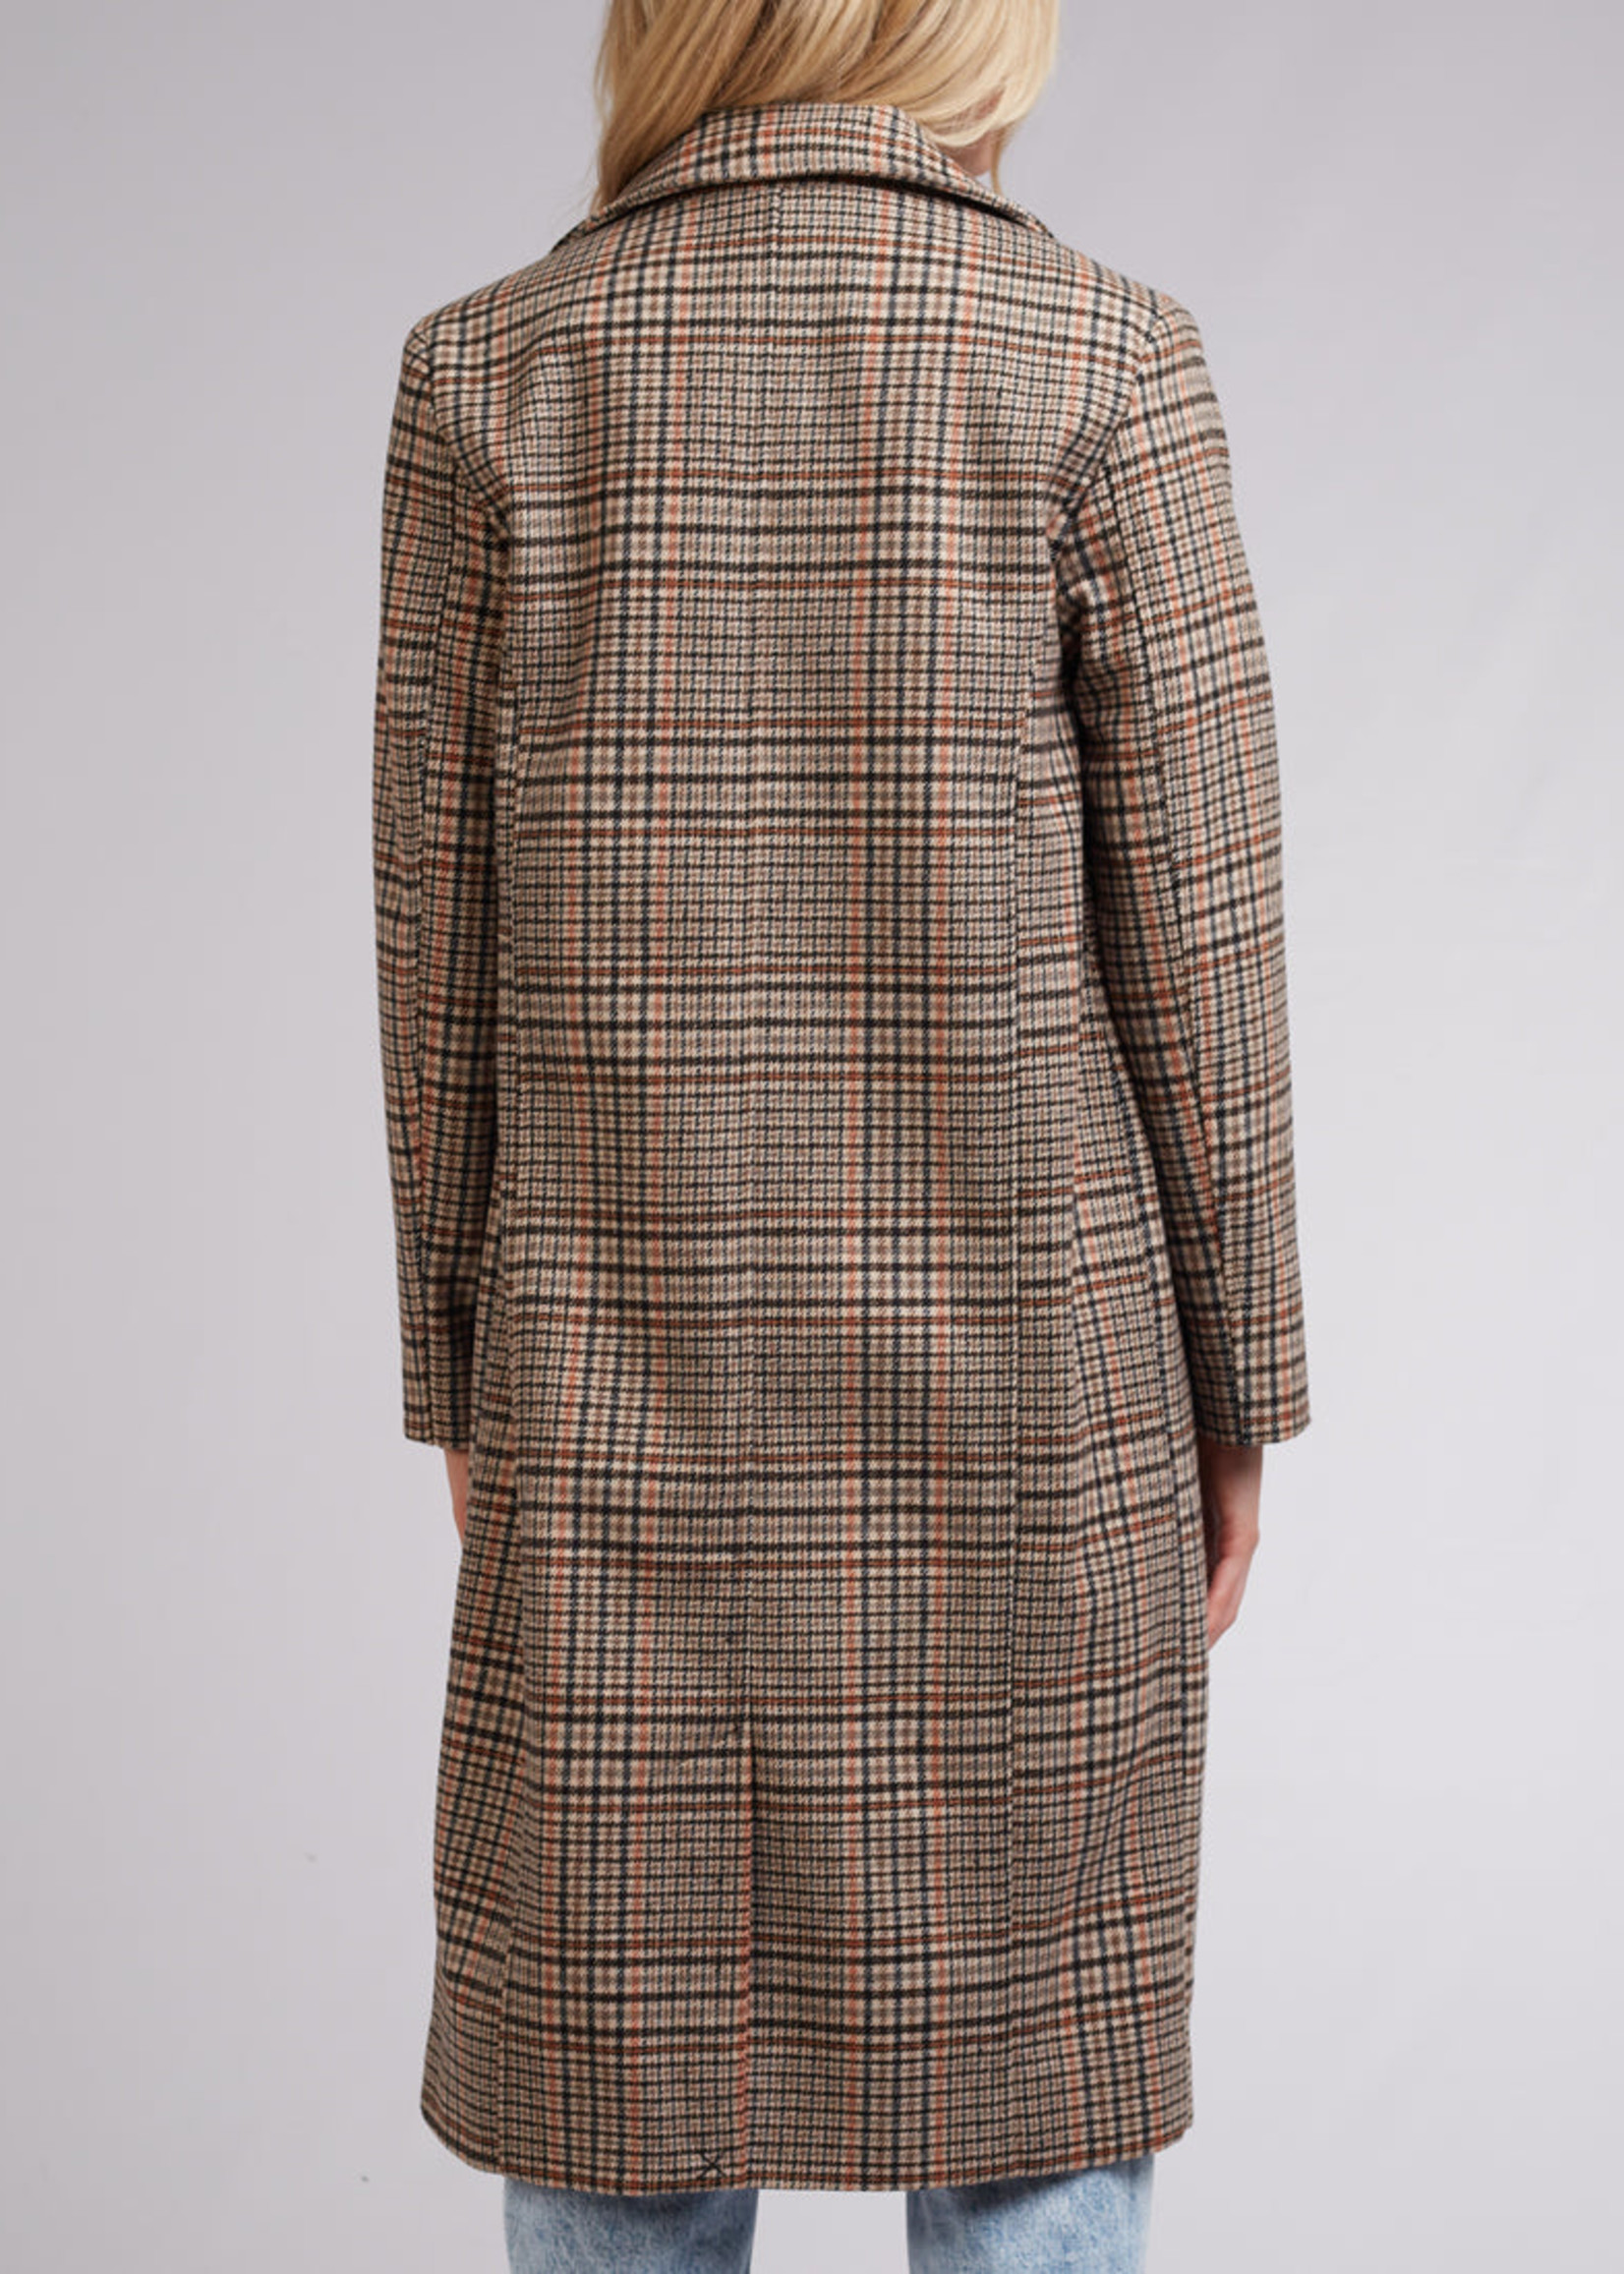 All About Eve Drew Check Coat